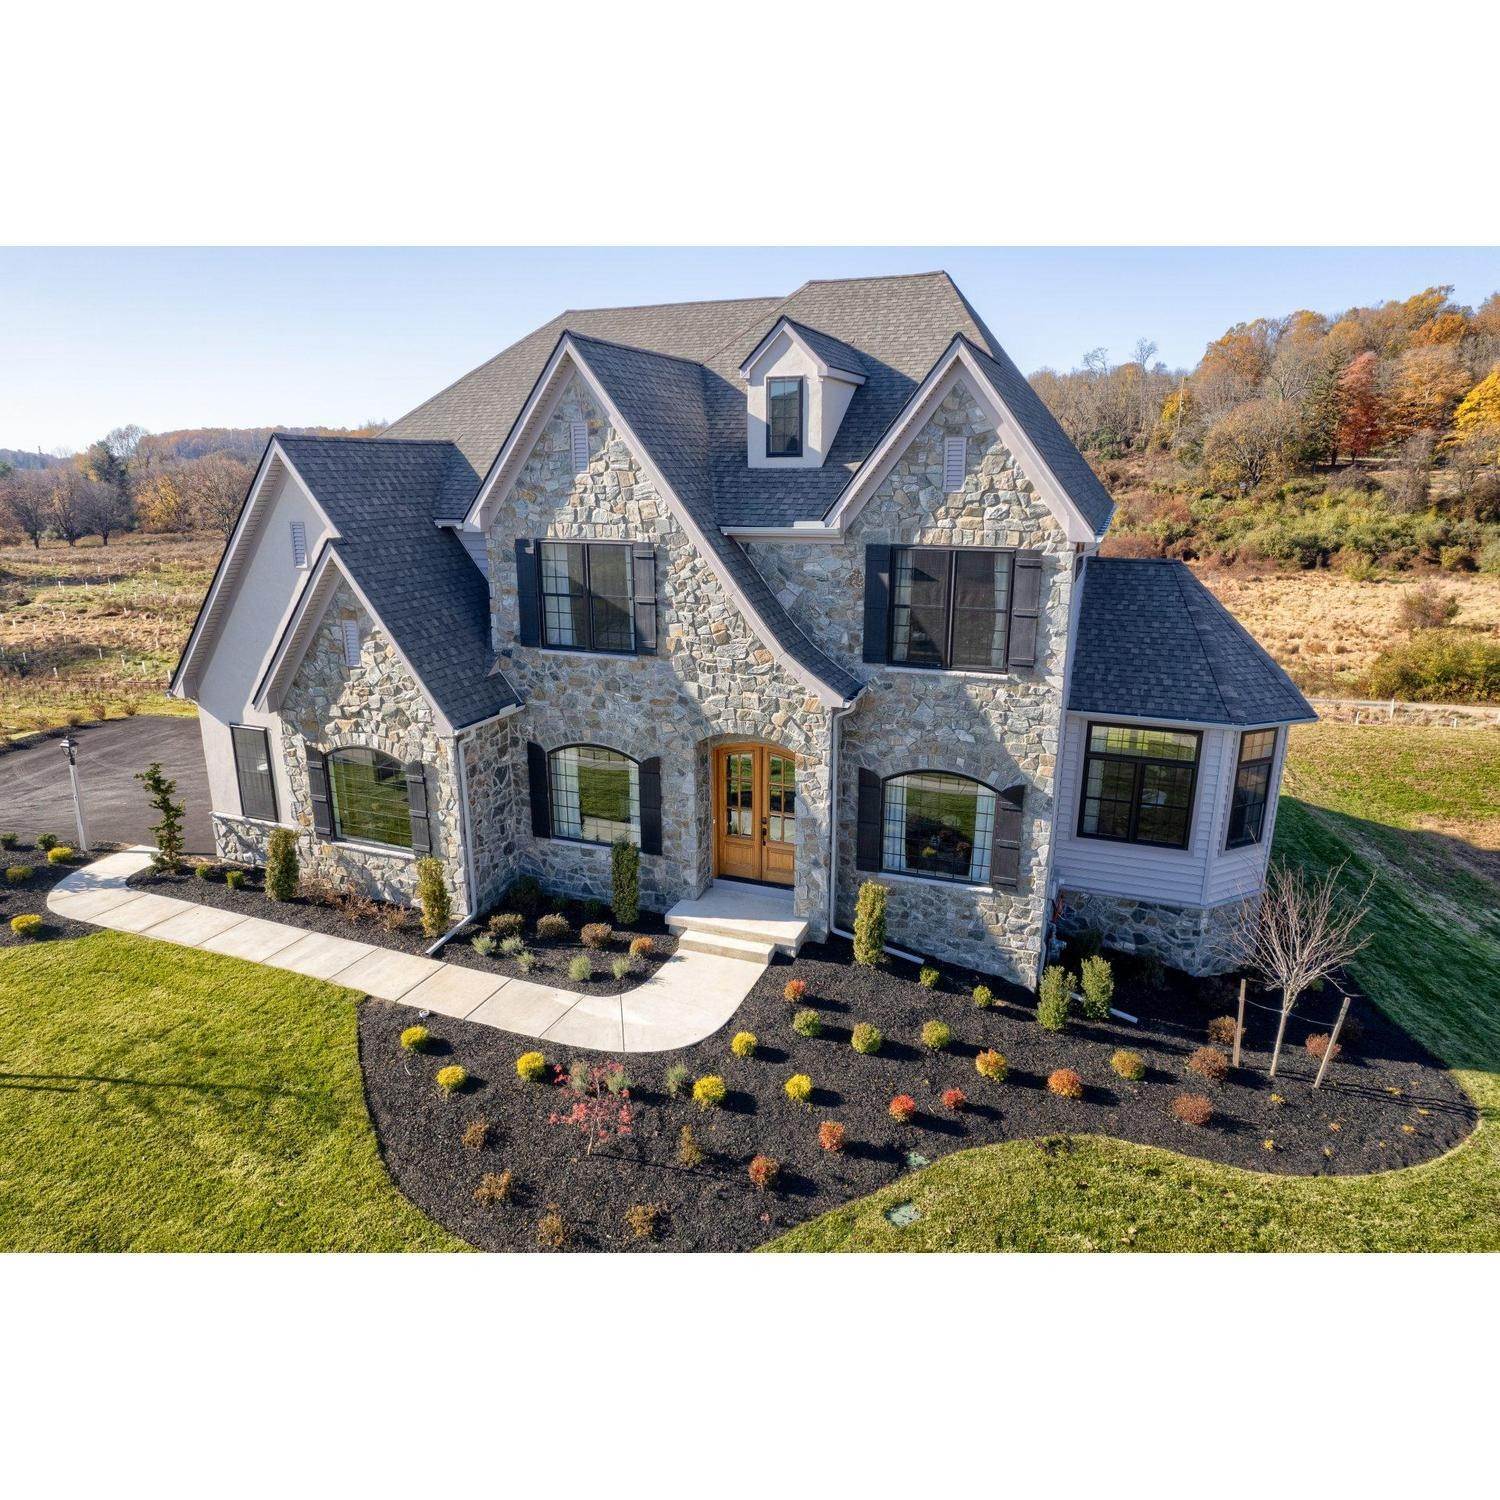 43. Ventry at Edgmont Preserve κτίριο σε 101 Parkview Way, Newtown Square, PA 19073